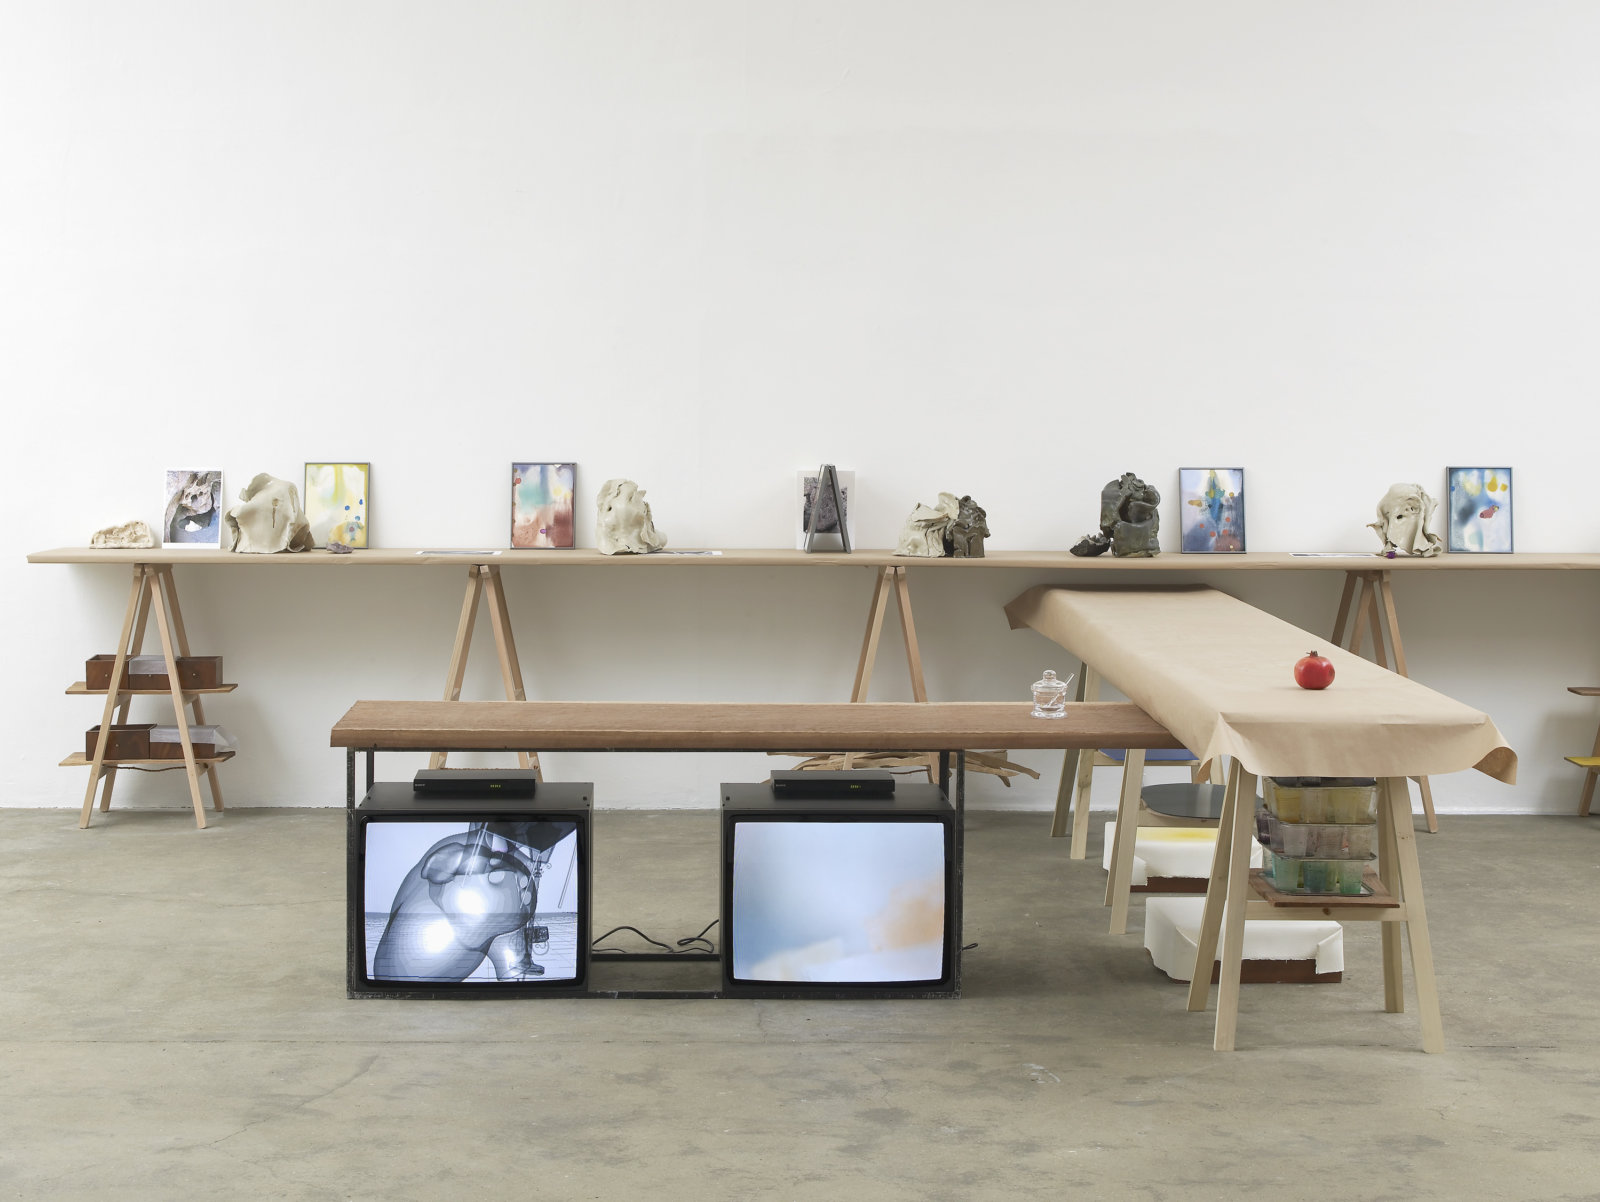 Christina Mackie, Fall Force and Planet, 2012, hantarax monitors, mahogany, glass jar, 2 DVDs, 4 minutes and 8 minutes, dimensions variable. Installation view, Painting the Weights, Chisenhale Gallery, London, UK, 2012